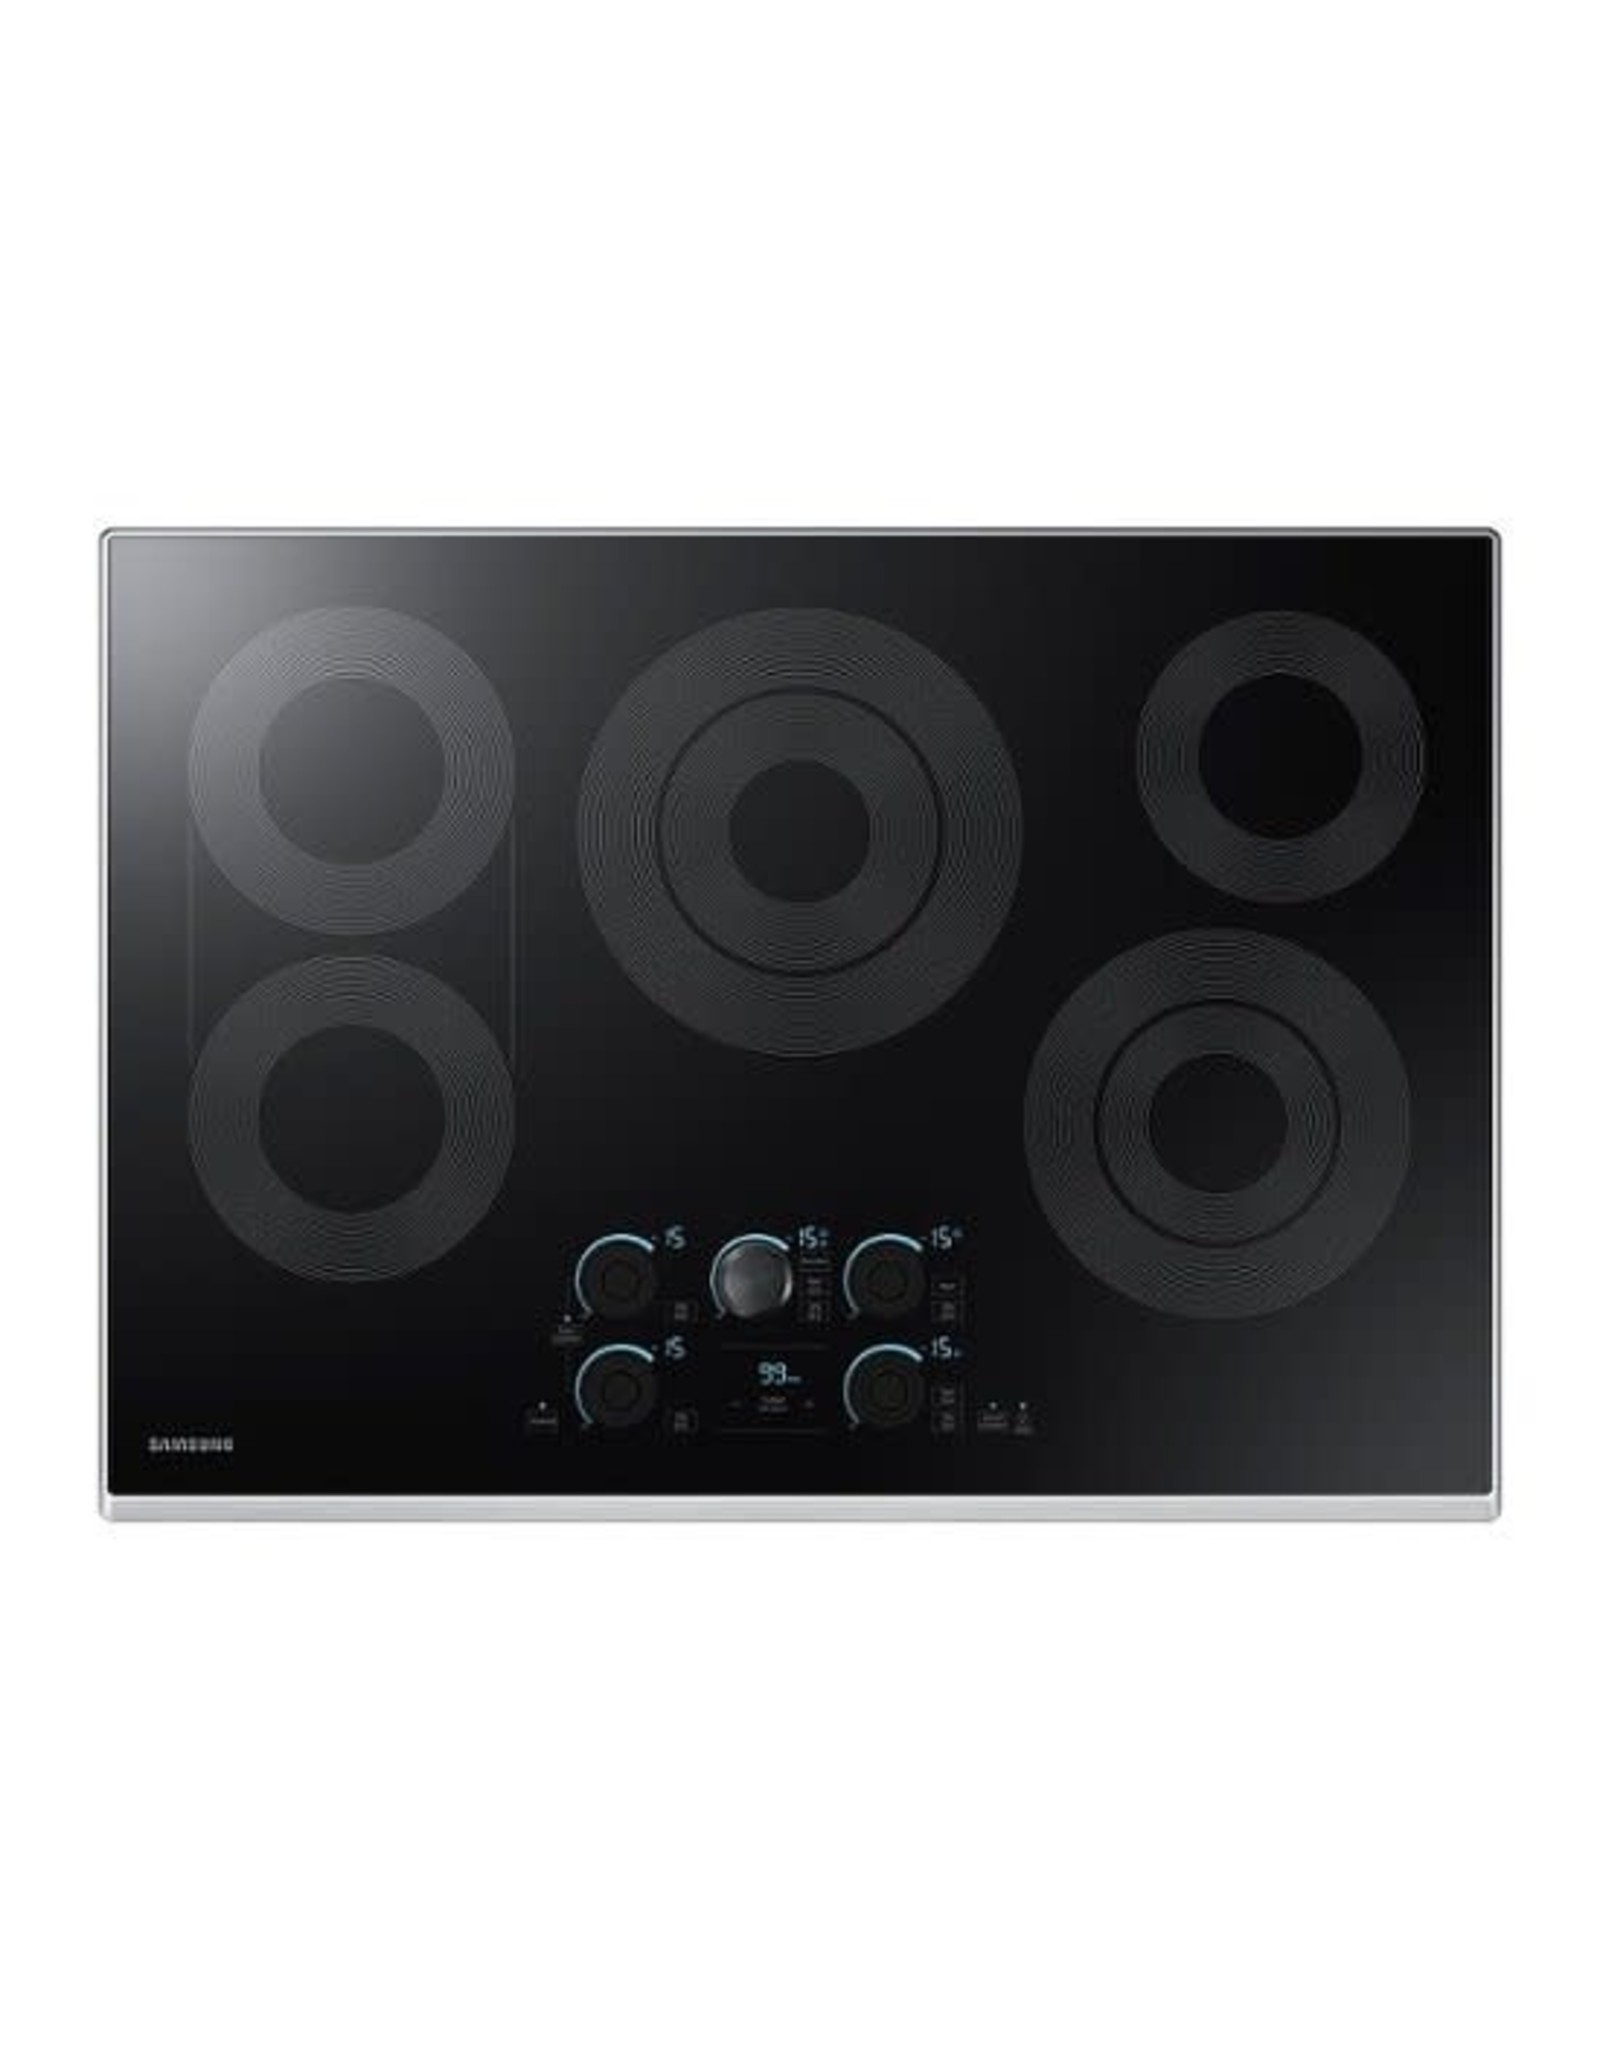 nz30k7570rs 30 in. Radiant Electric Cooktop in Stainless Steel with 5 Elements, Rapid Boil and Wi-Fi